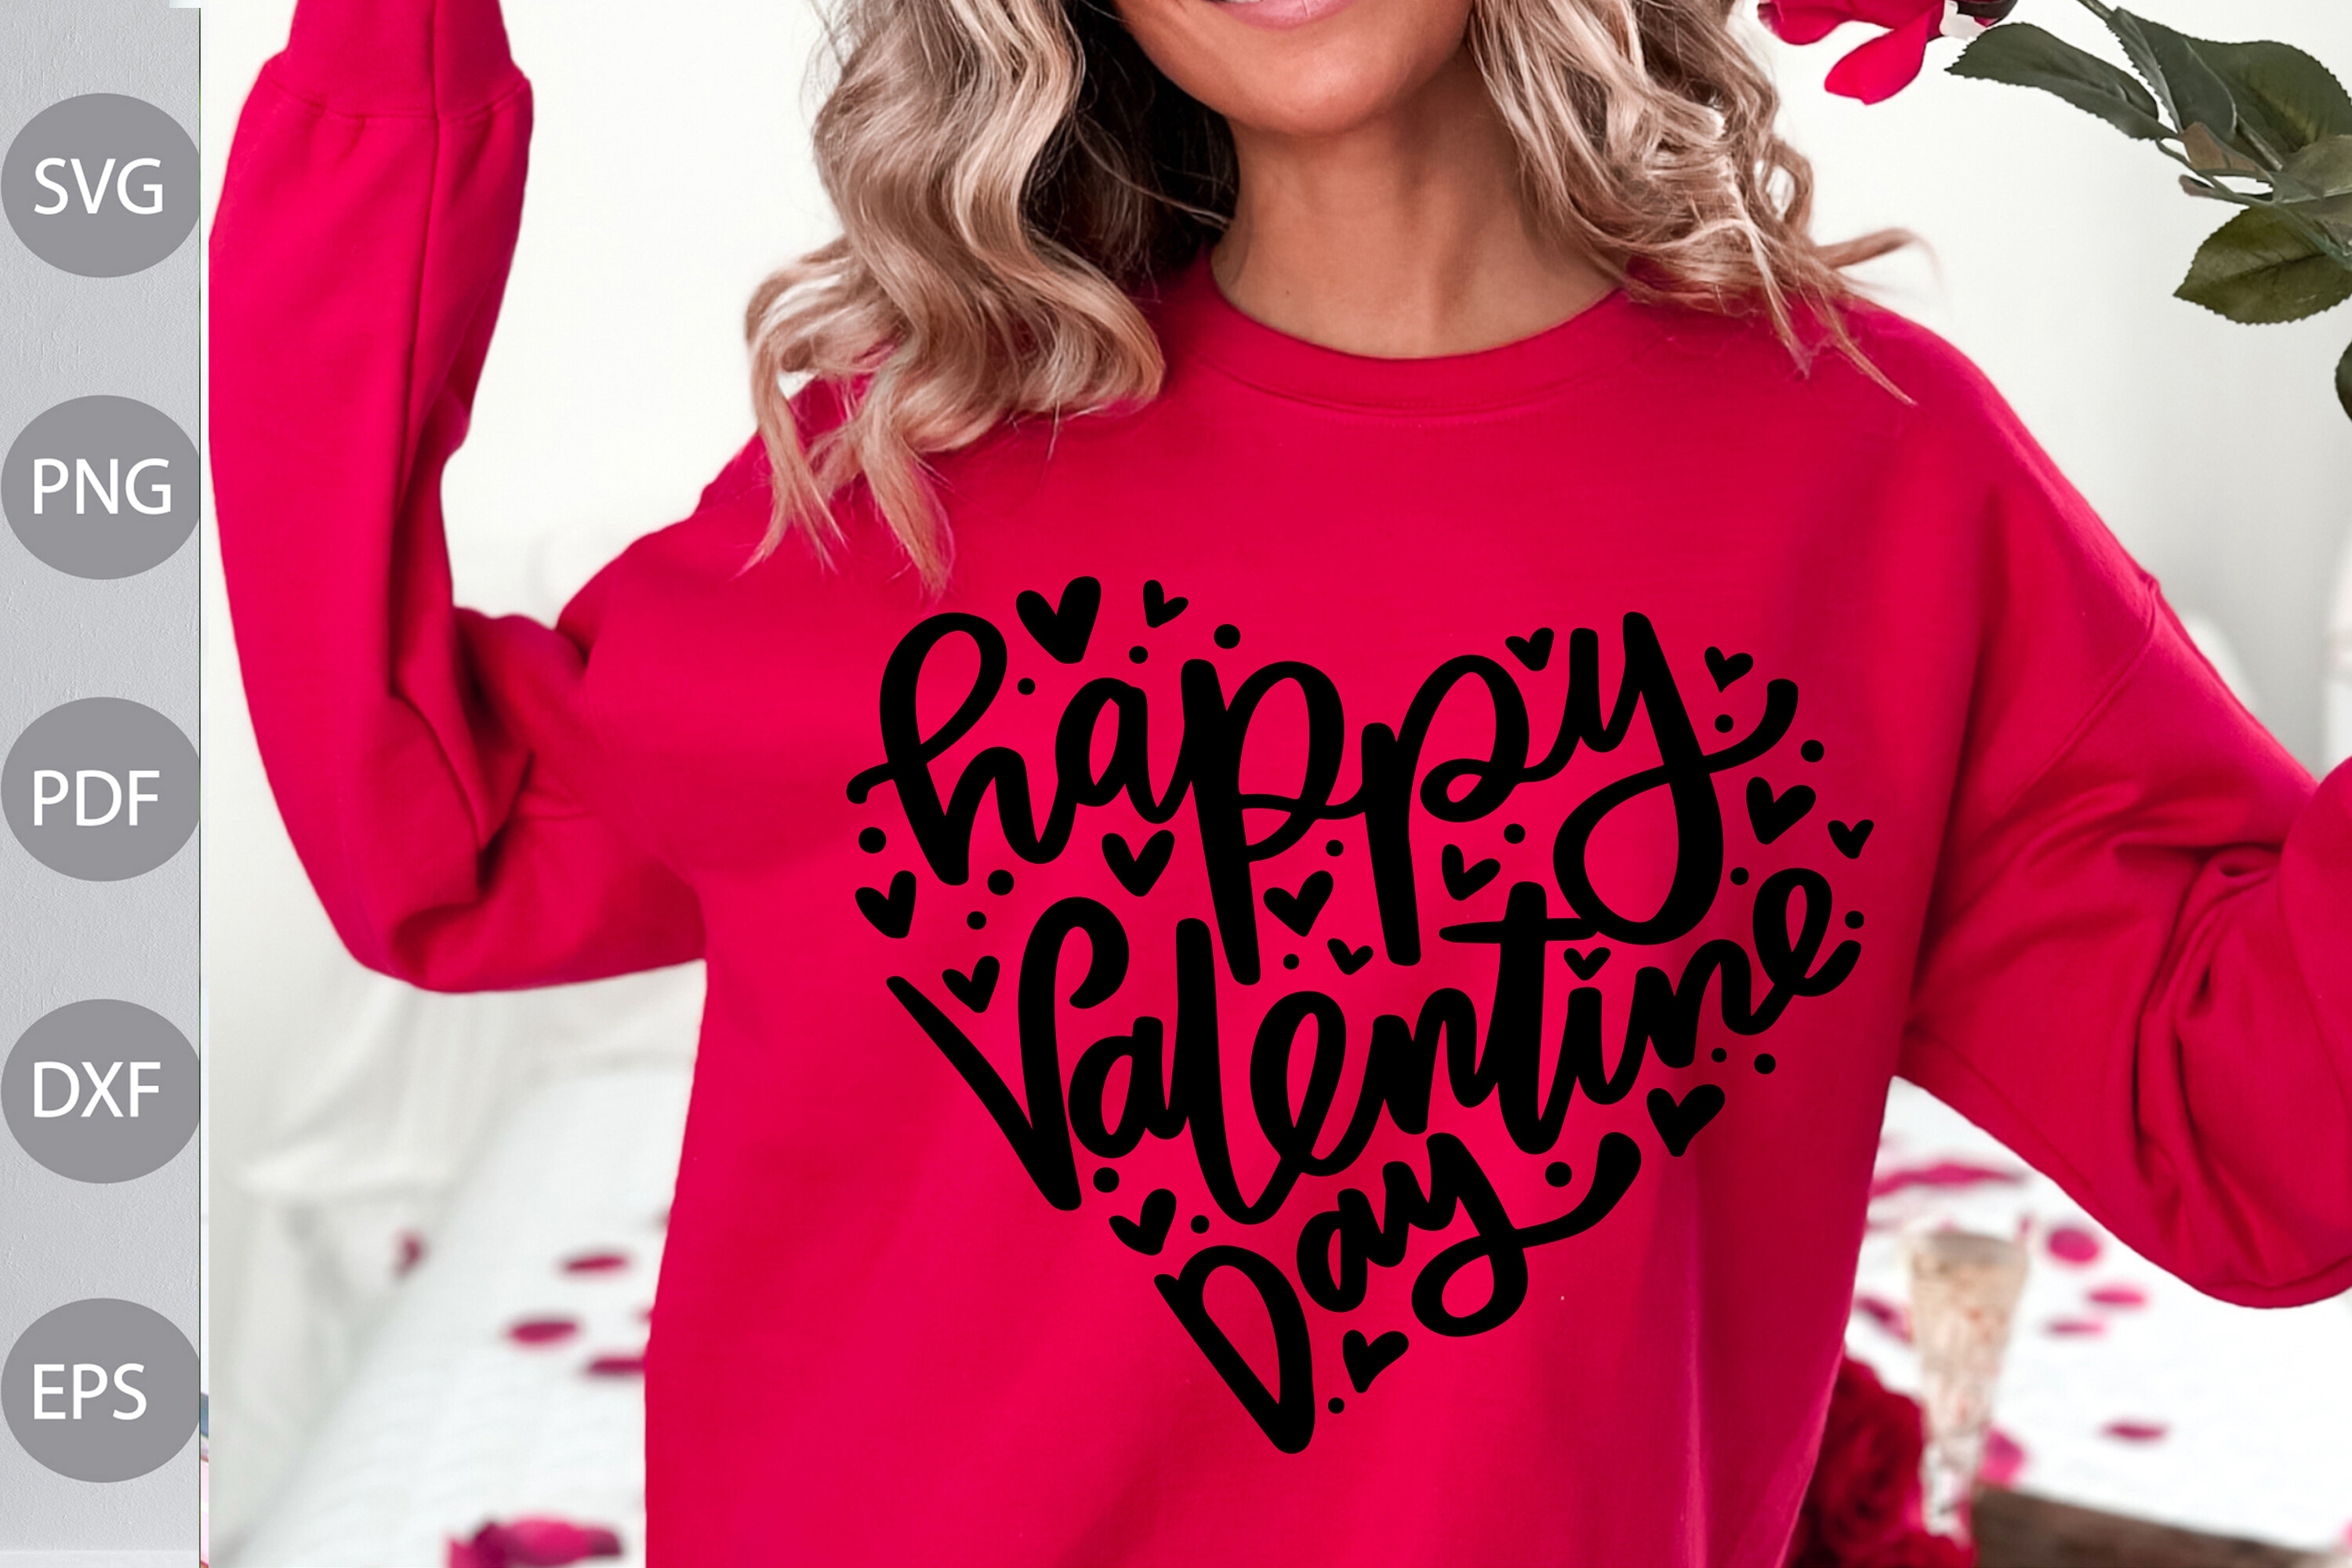 Happy Valentines Day SVG Cut Files Graphic by Scmdesign · Creative Fabrica